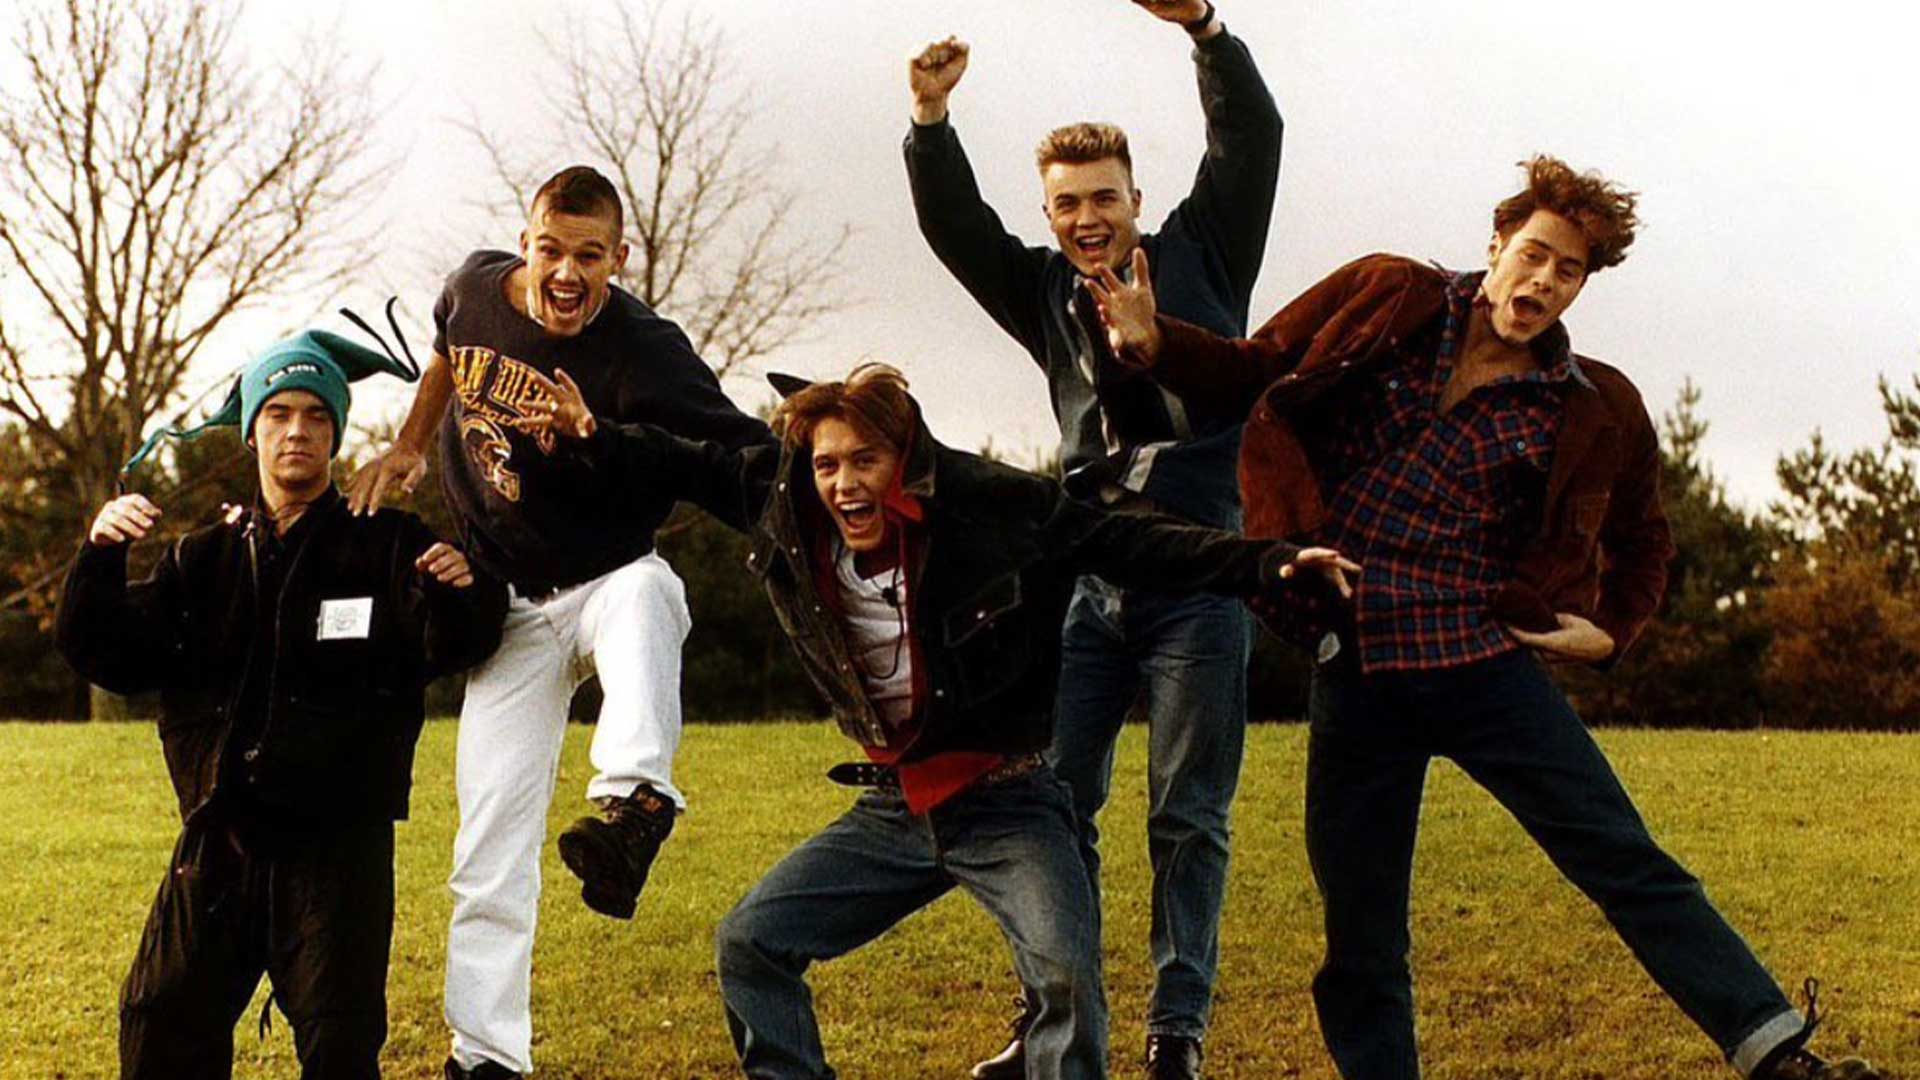 An old photo of Take That 